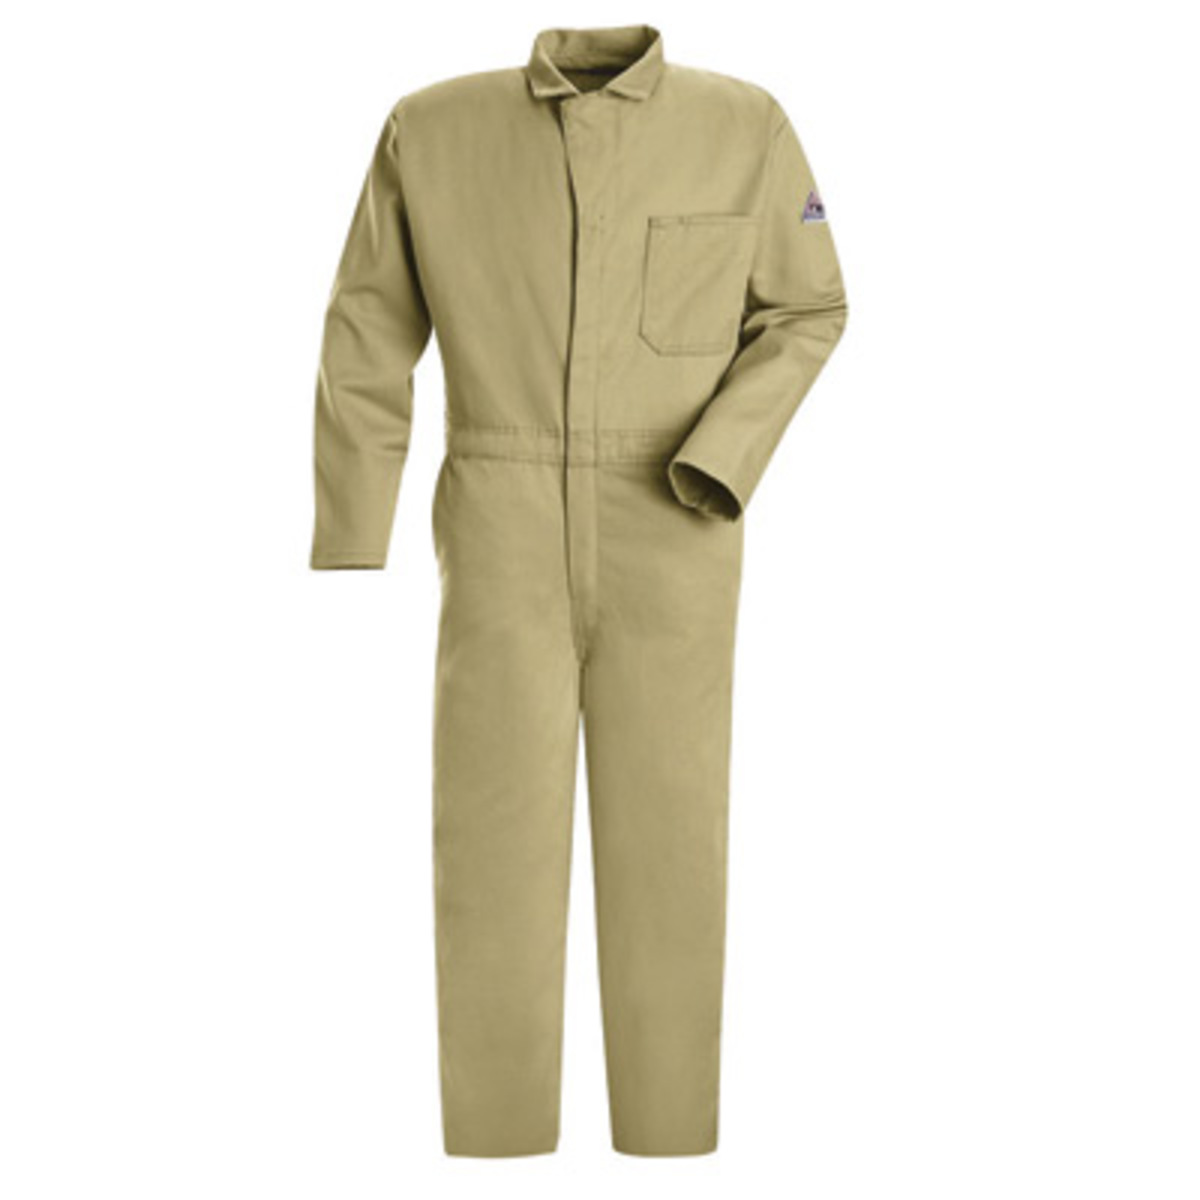 Bulwark® 62 Tall Khaki EXCEL FR® Twill Cotton Flame Resistant Coveralls With Zipper Front Closure